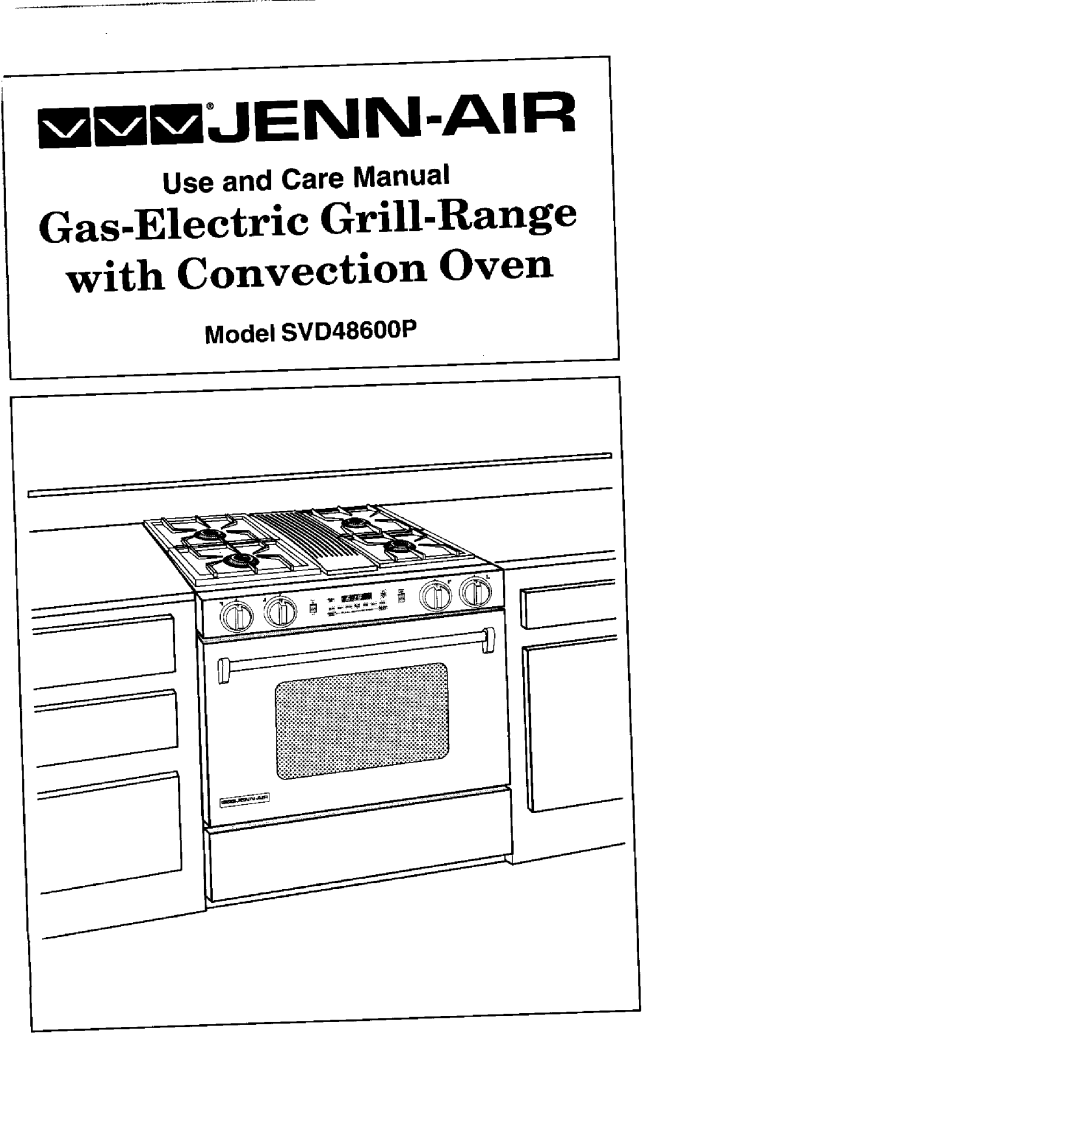 Jenn-Air SDV48600P manual mmmJENN-AIR, Gas-Electric Grill-Range with Convection Oven, Use and Care Manual, Model SVD48600P 